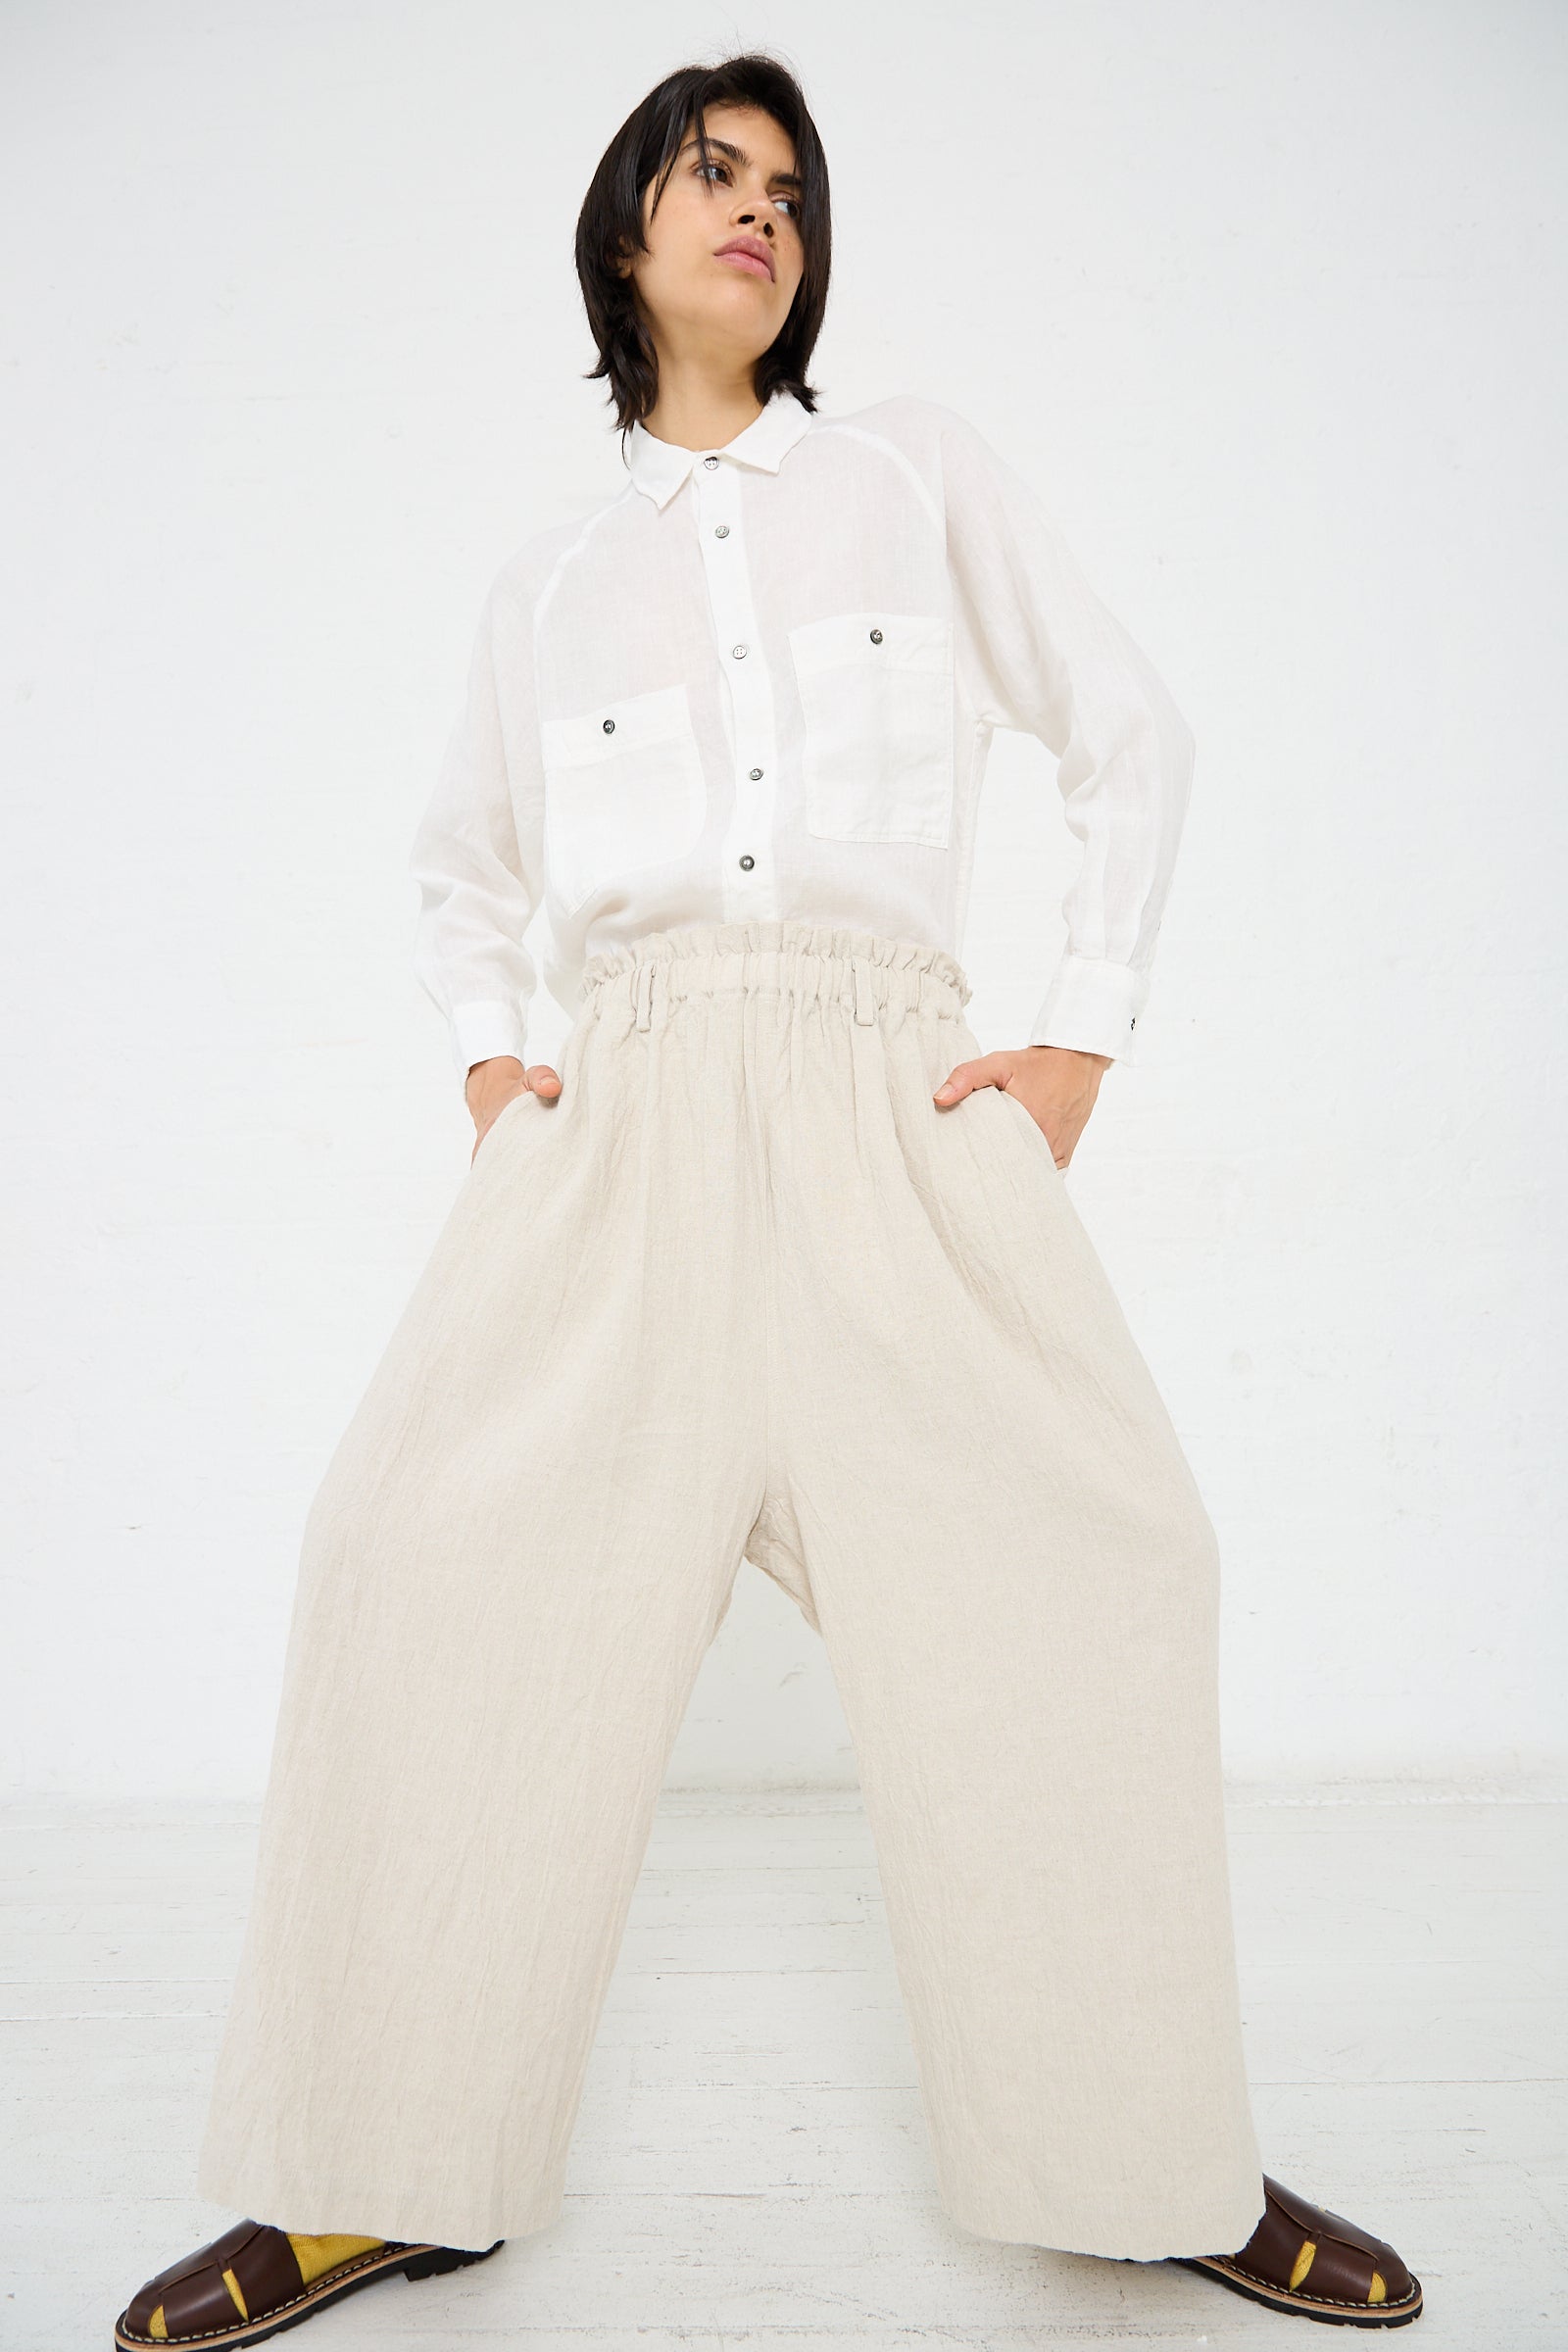 A person in a white button-up shirt and Ichi Antiquités Linen Vintage Pant in Natural stands confidently against a white background.